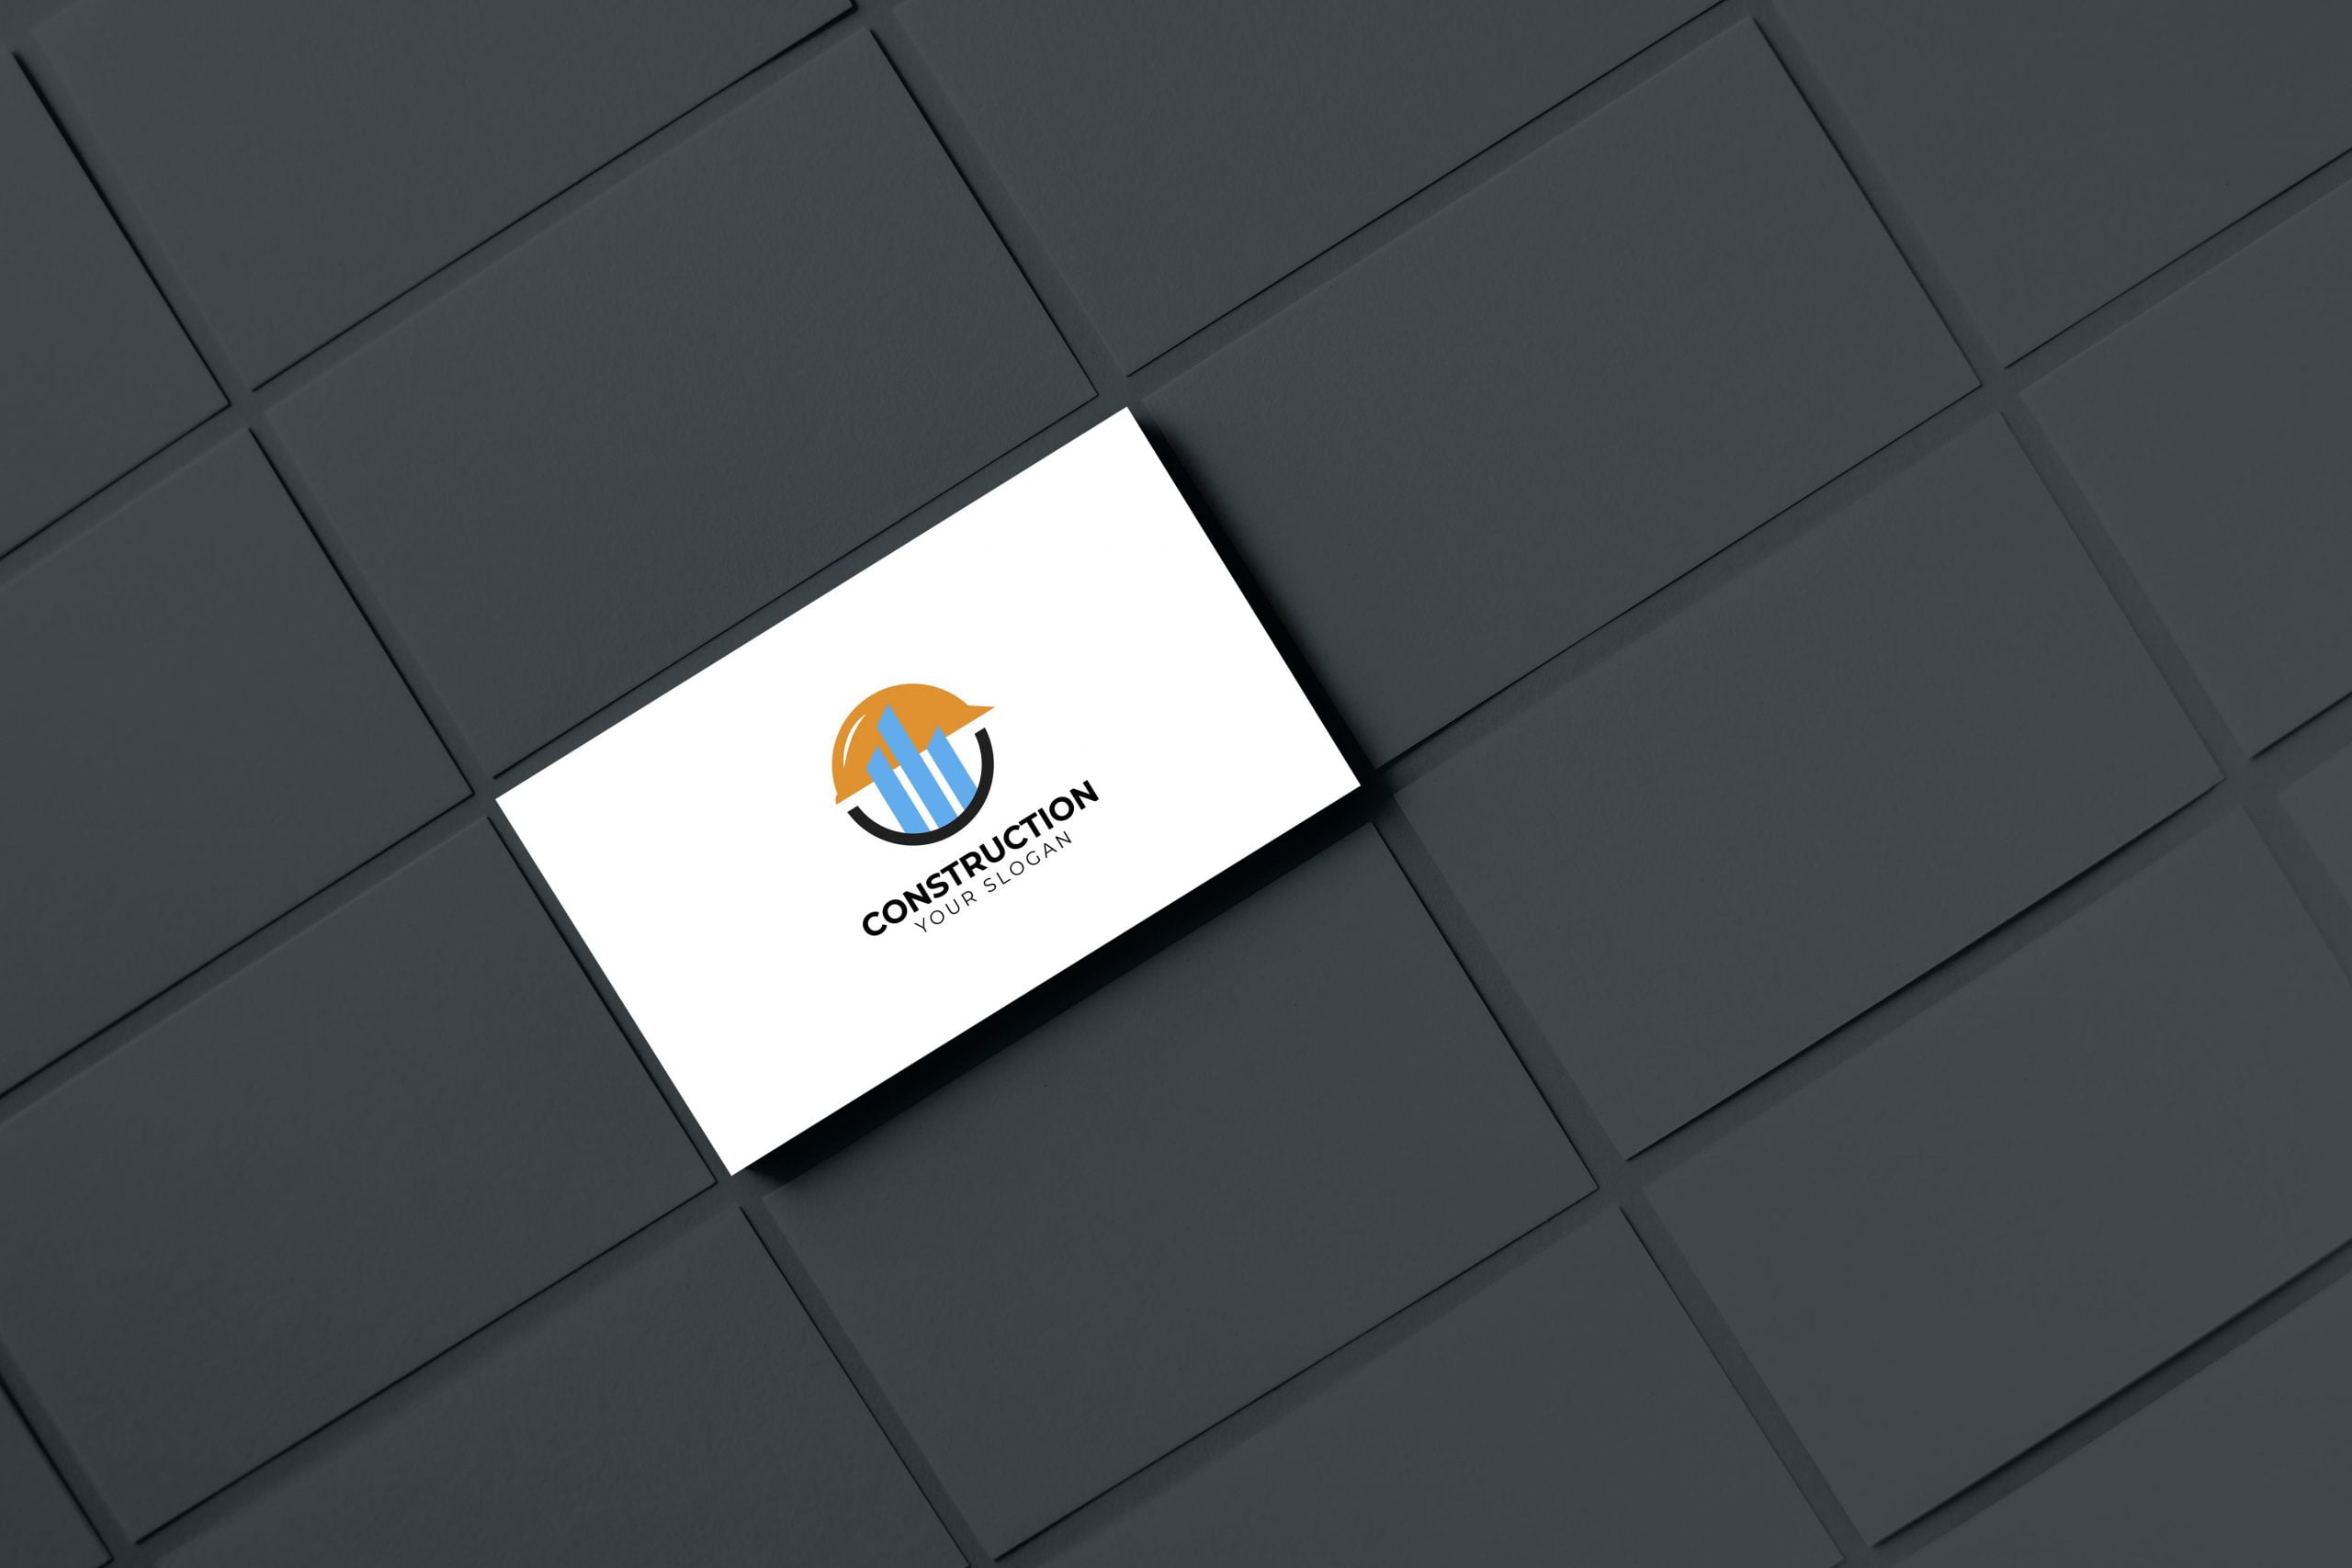 CONSTRUCTION LOGO ON BUSINESS CARD